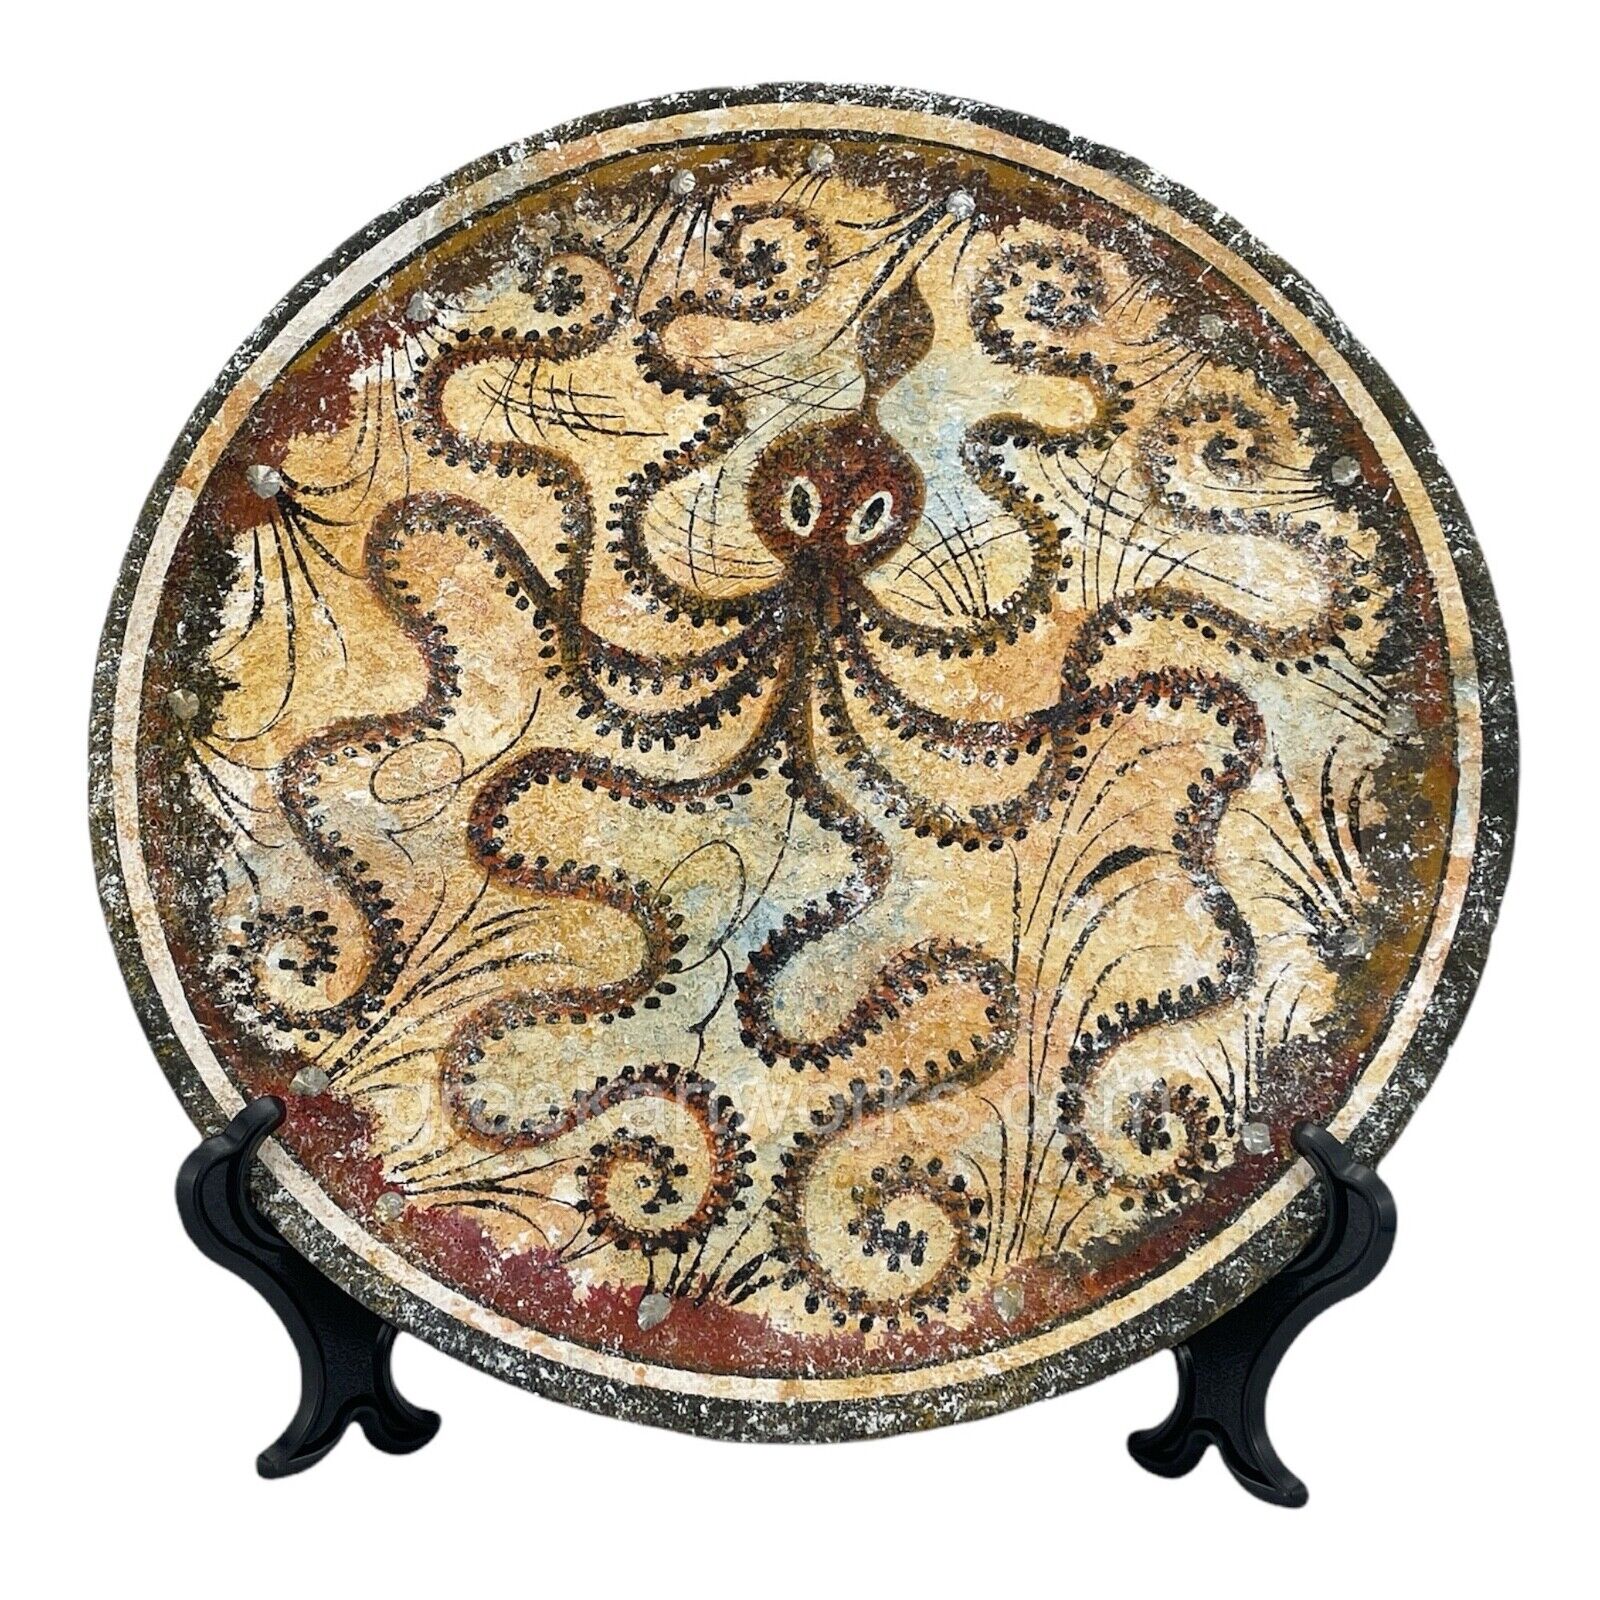 Minoan Painting Octopus Knossos Ceramic Plate Ancient Greek Pottery Décor